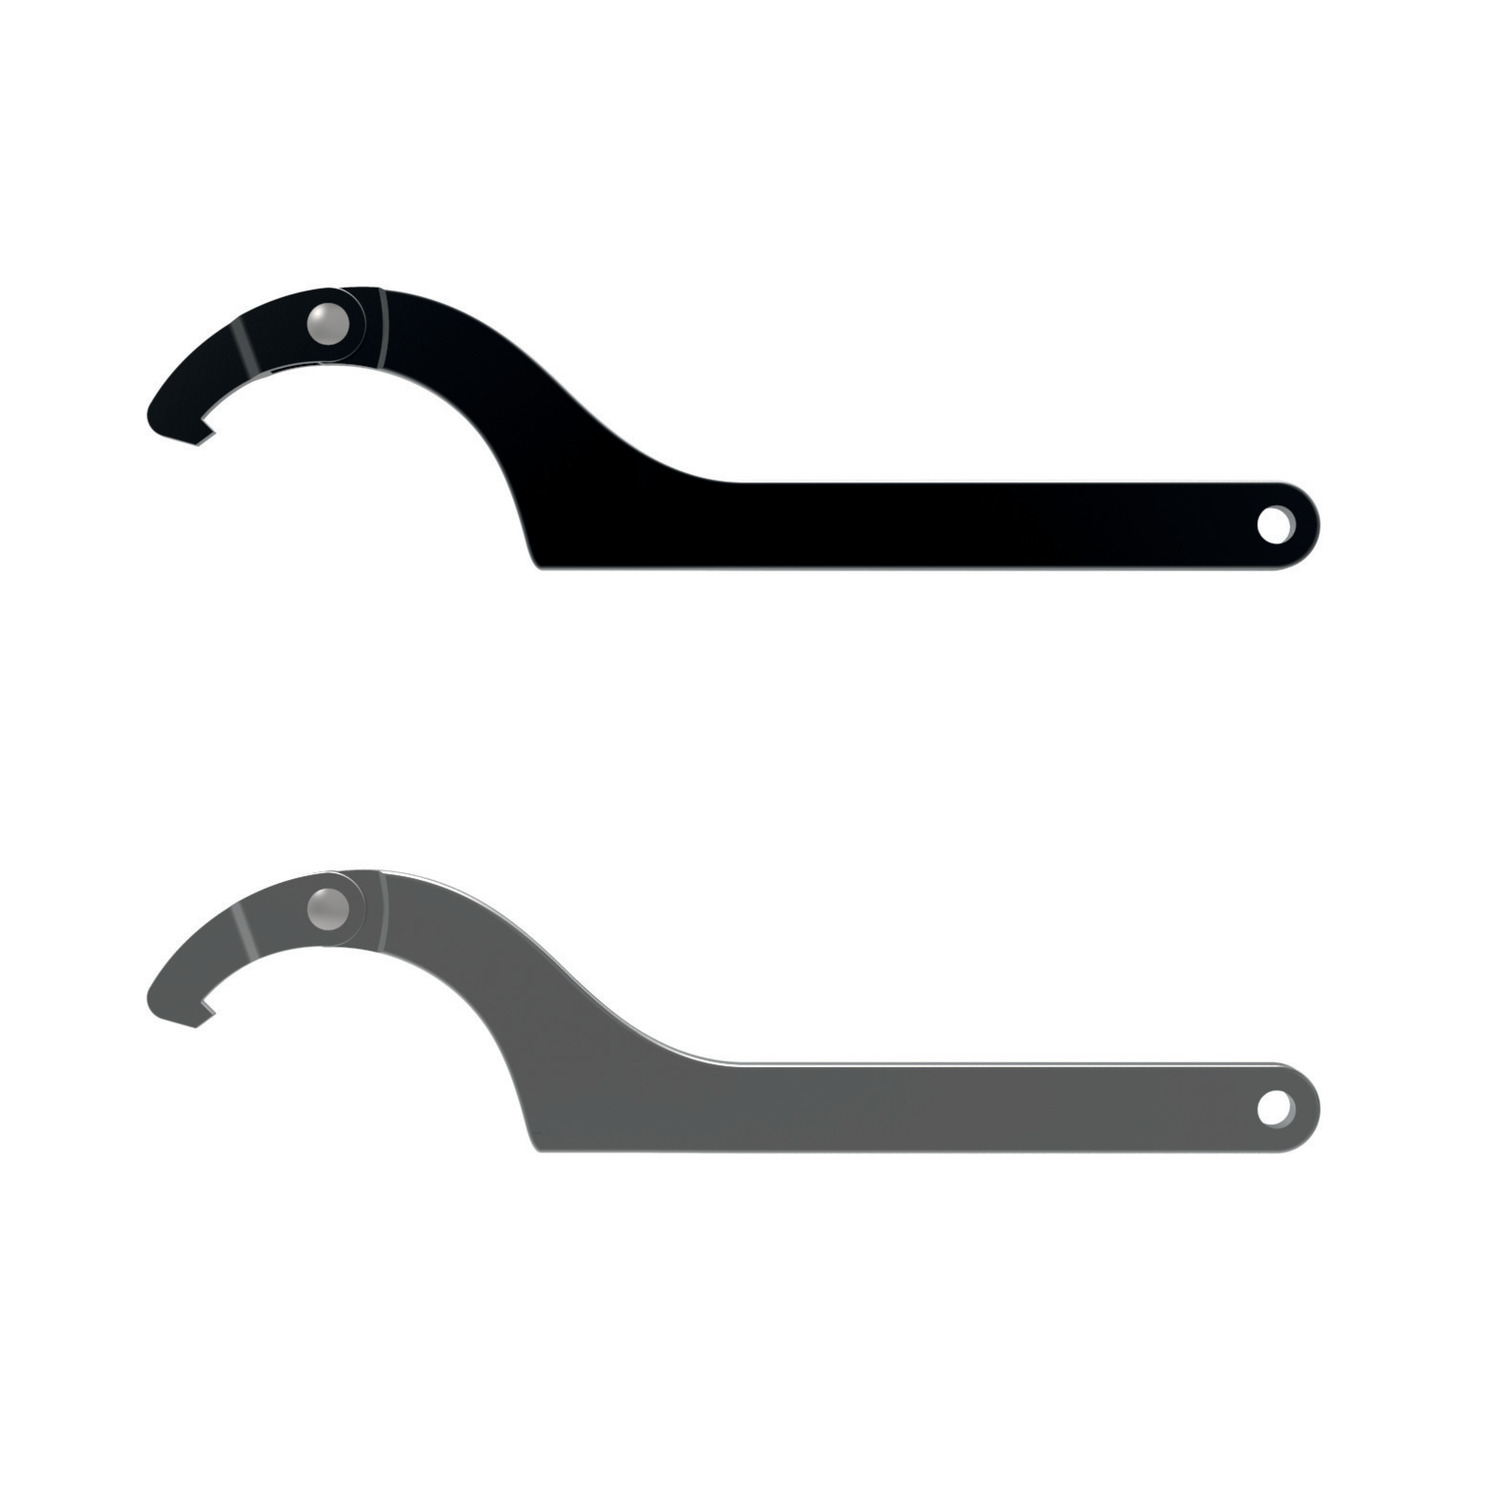 95110 Hook Spanners - with Hook Nose